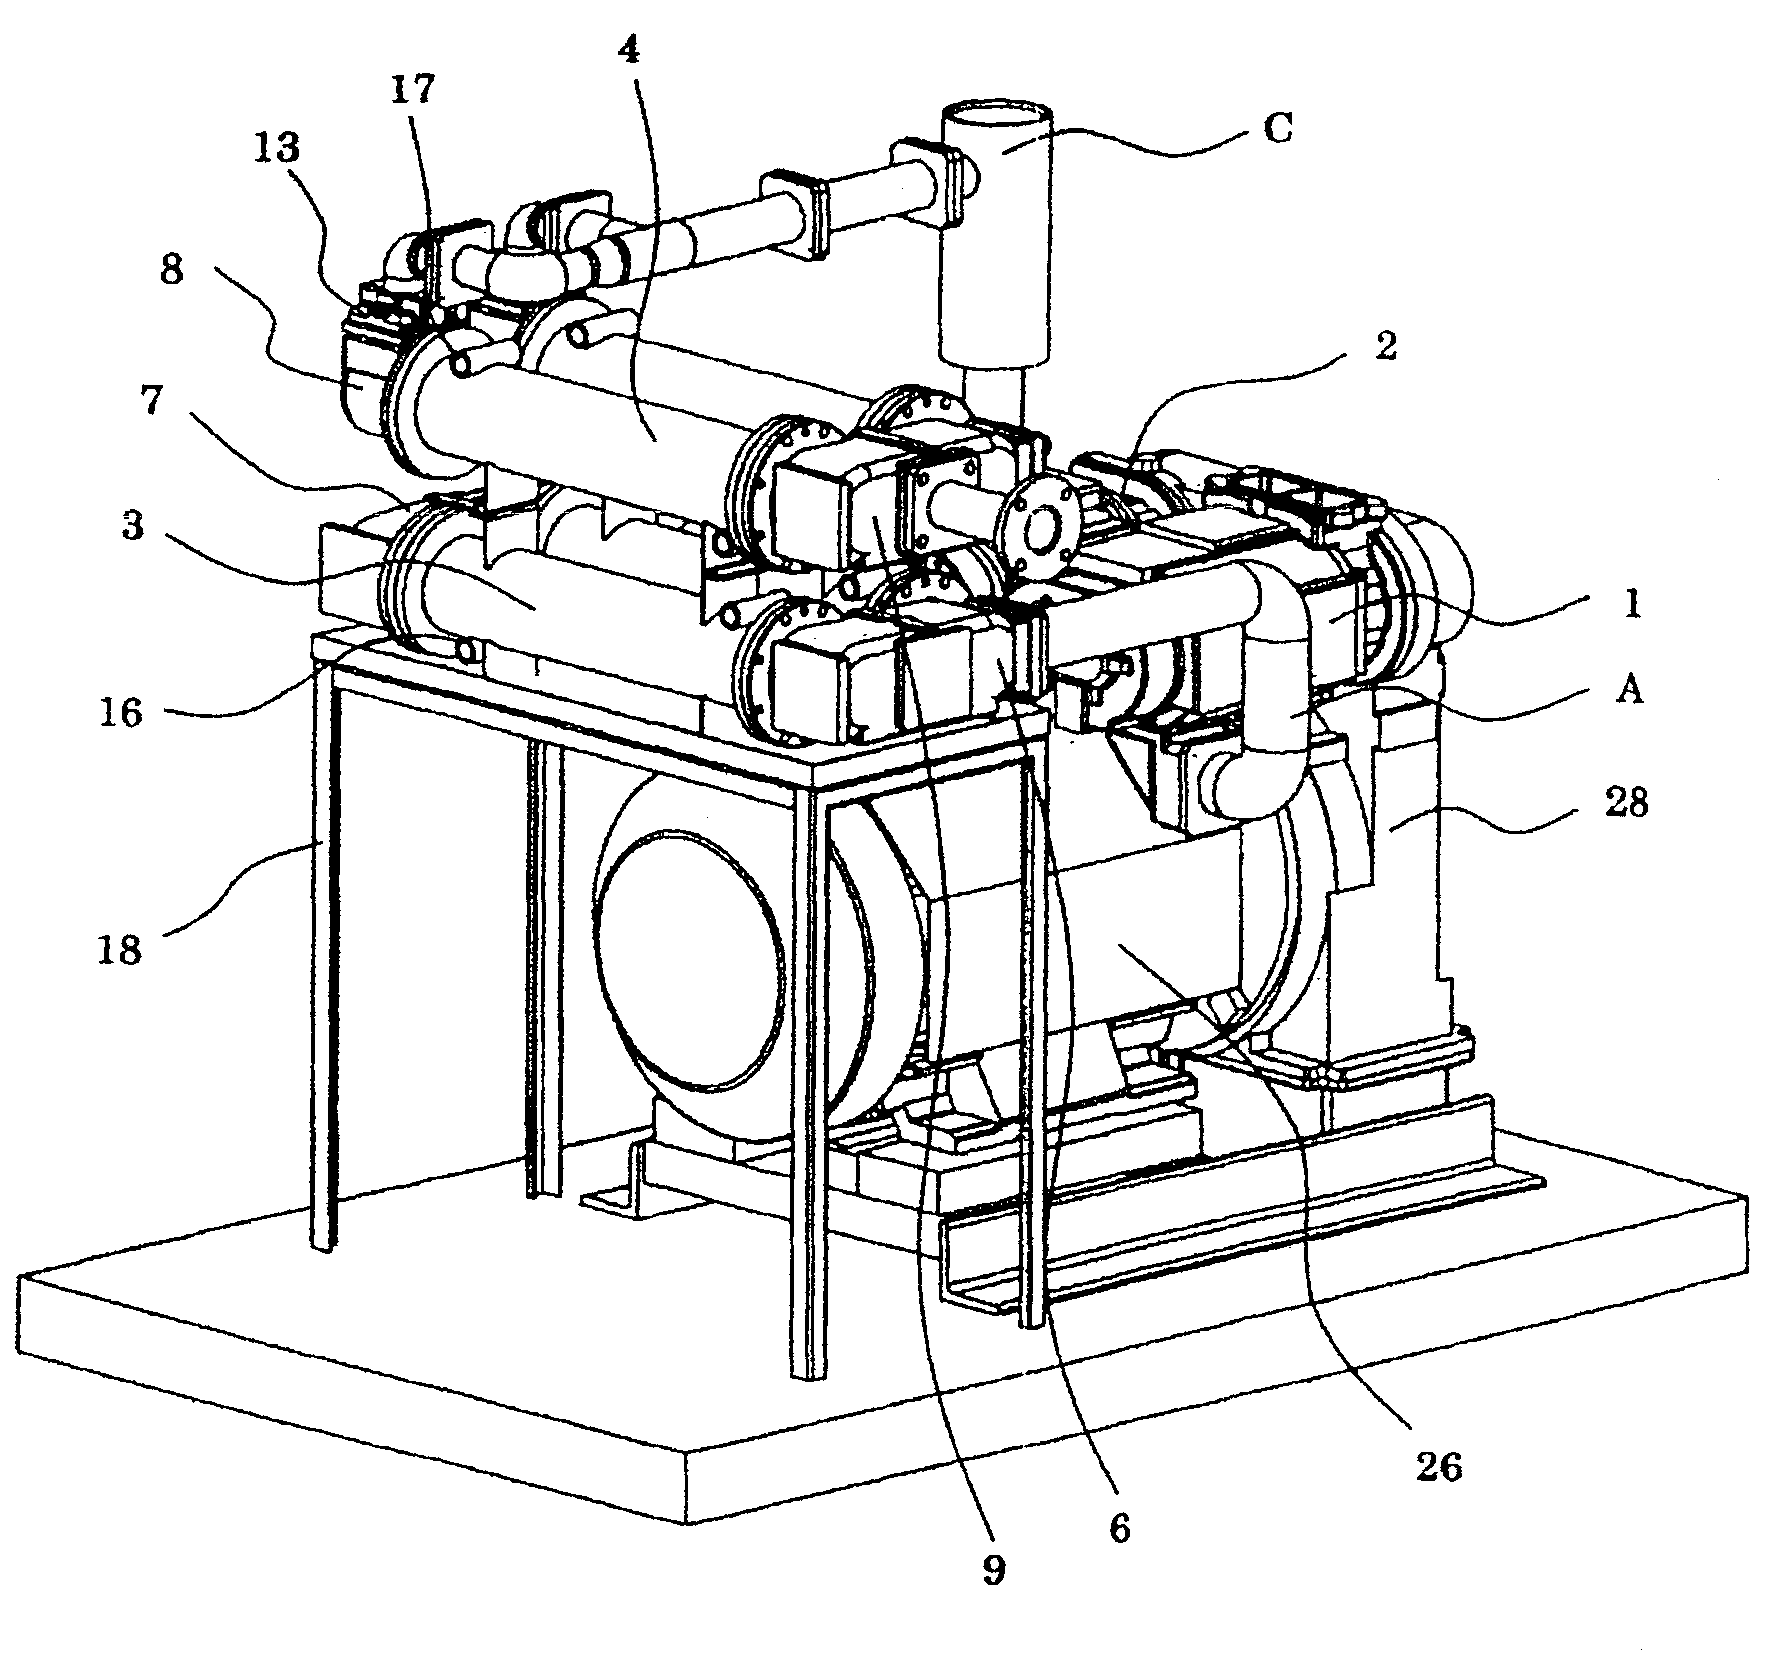 Water-cooled oil-free air compressor